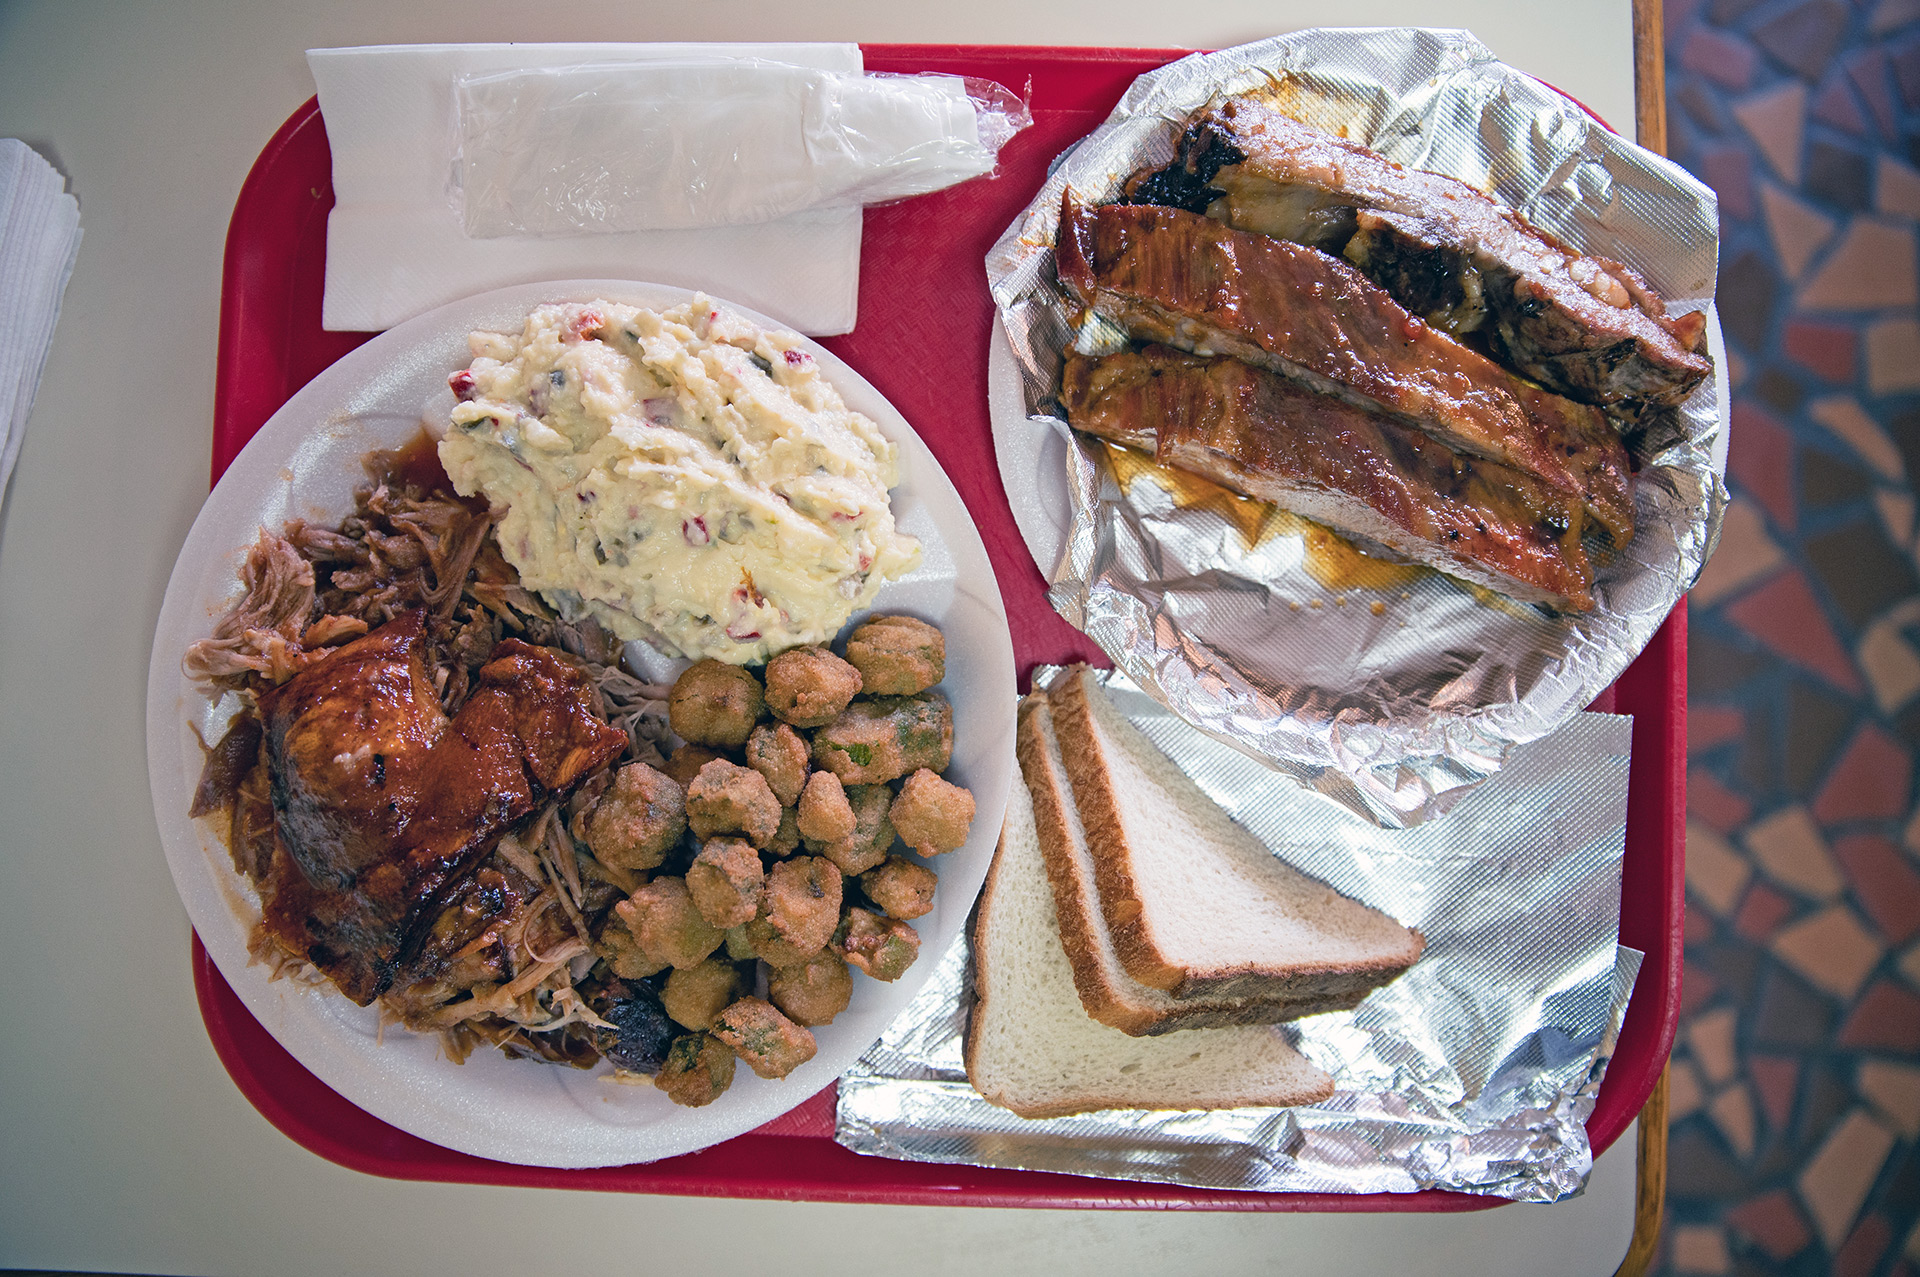 A prodigious portion of barbecued ribs, pork shoulder, potato salad and fried okra bends the plate at Lannie’s BBQ Spot.